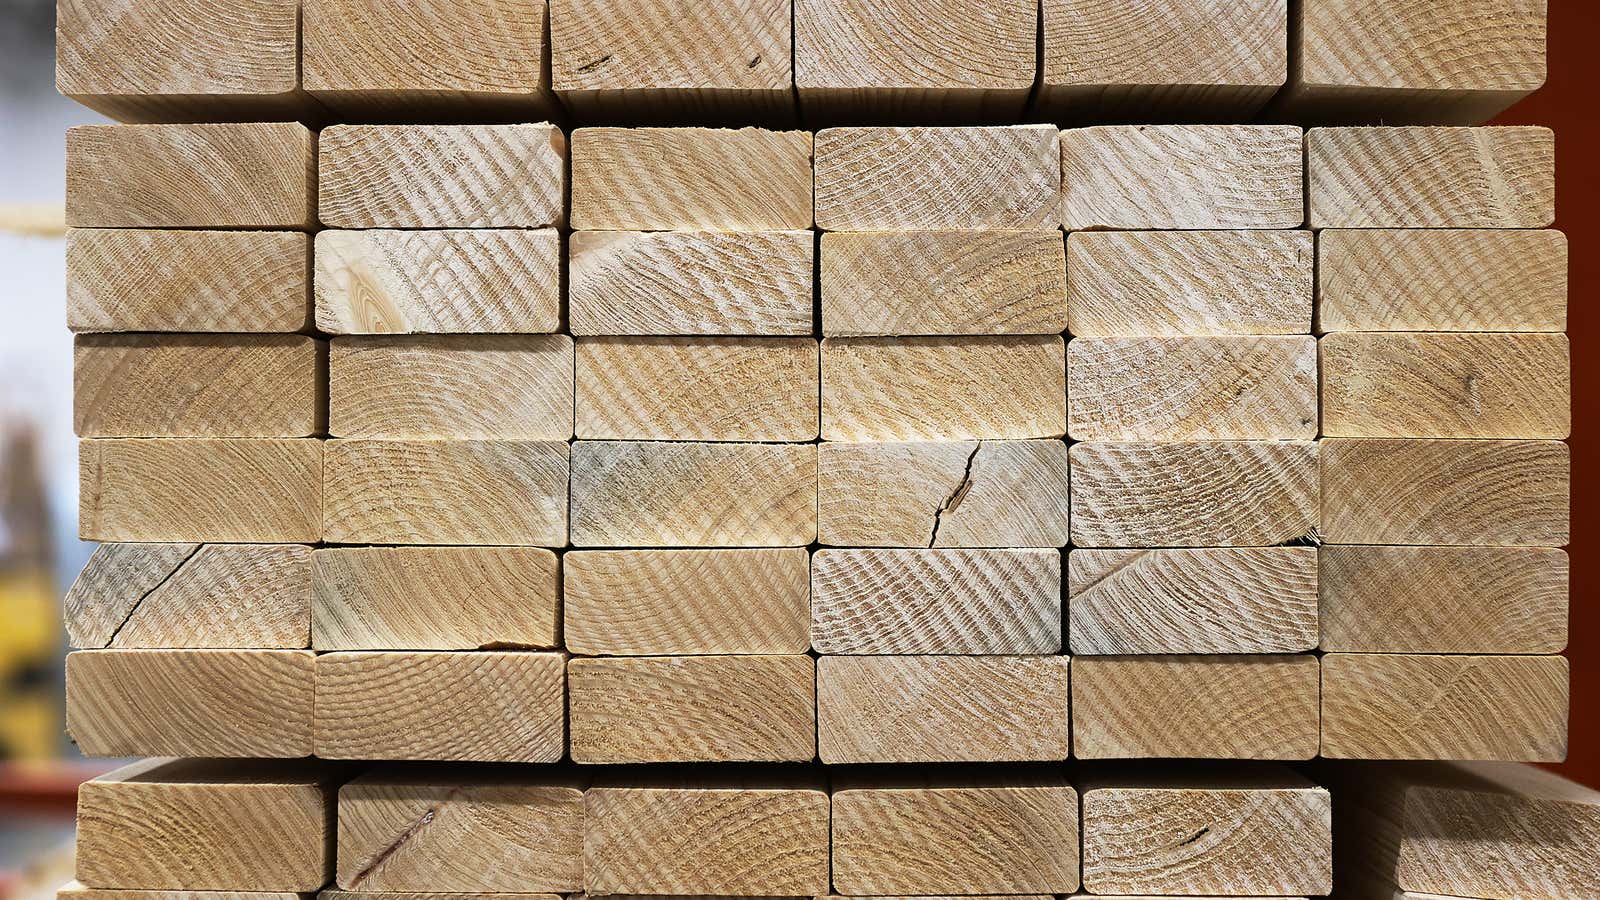 Lumber prices are near pre-pandemic lows